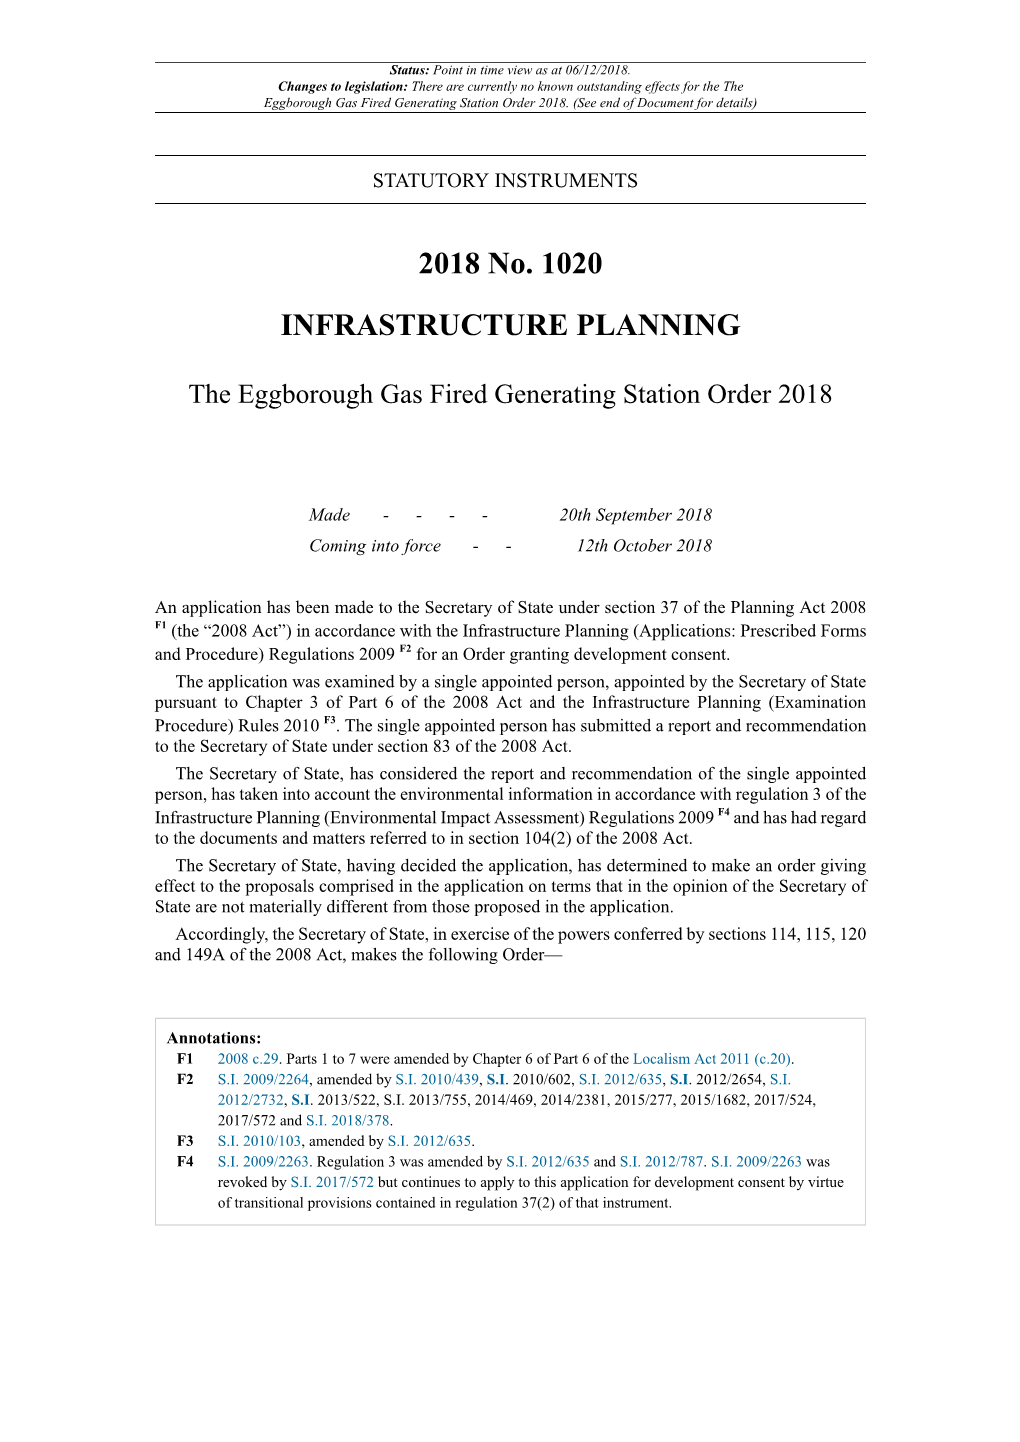 The Eggborough Gas Fired Generating Station Order 2018